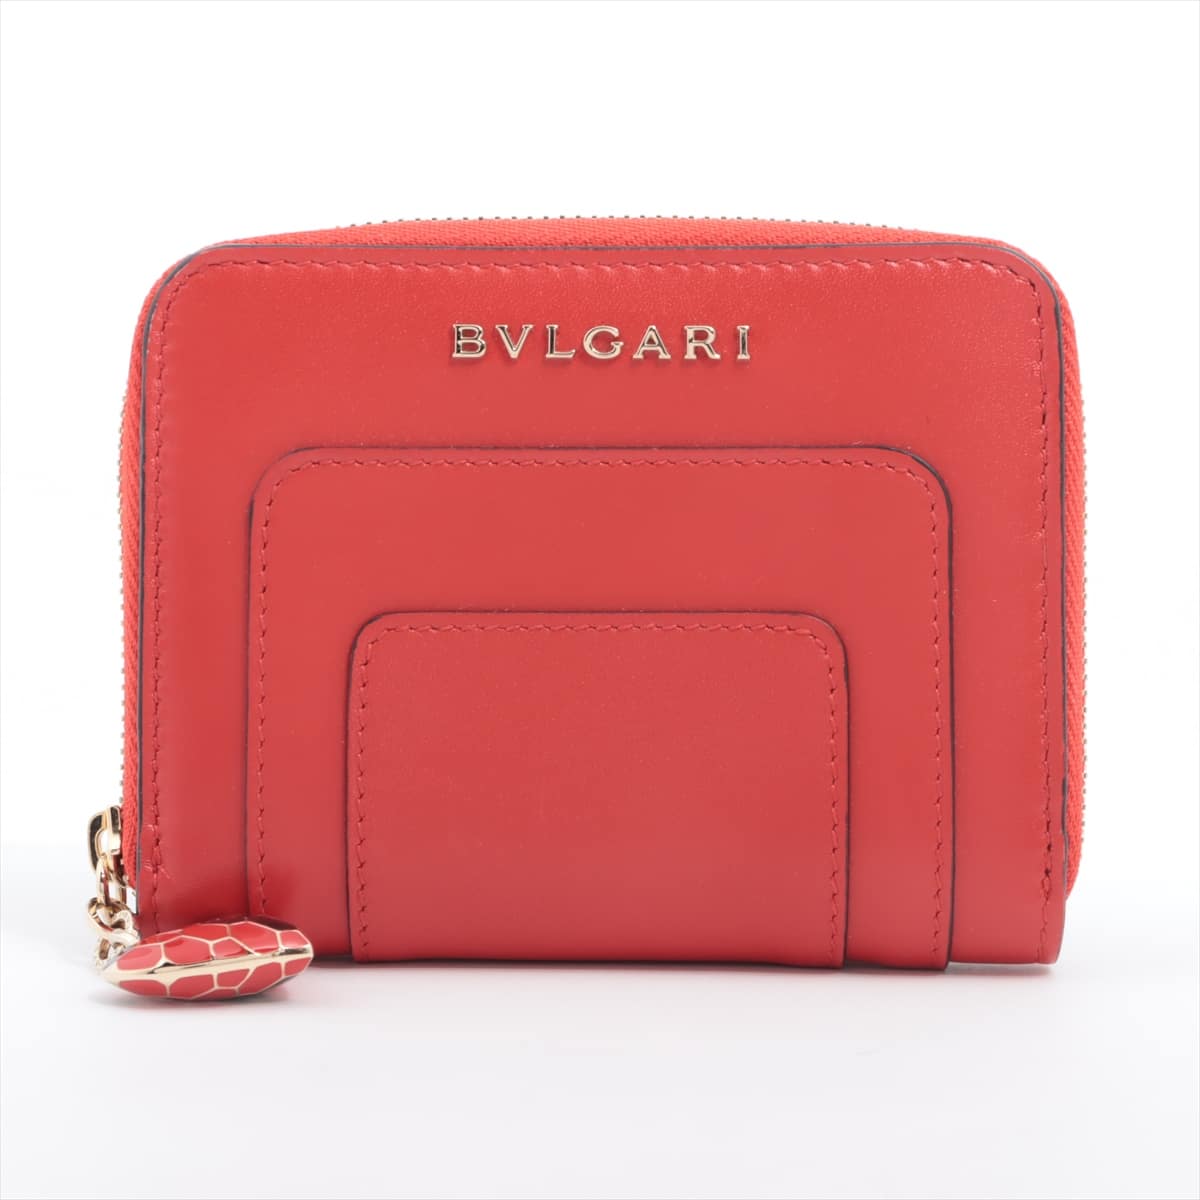 Bvlgari Serpenti Forever Leather Coin purse Red